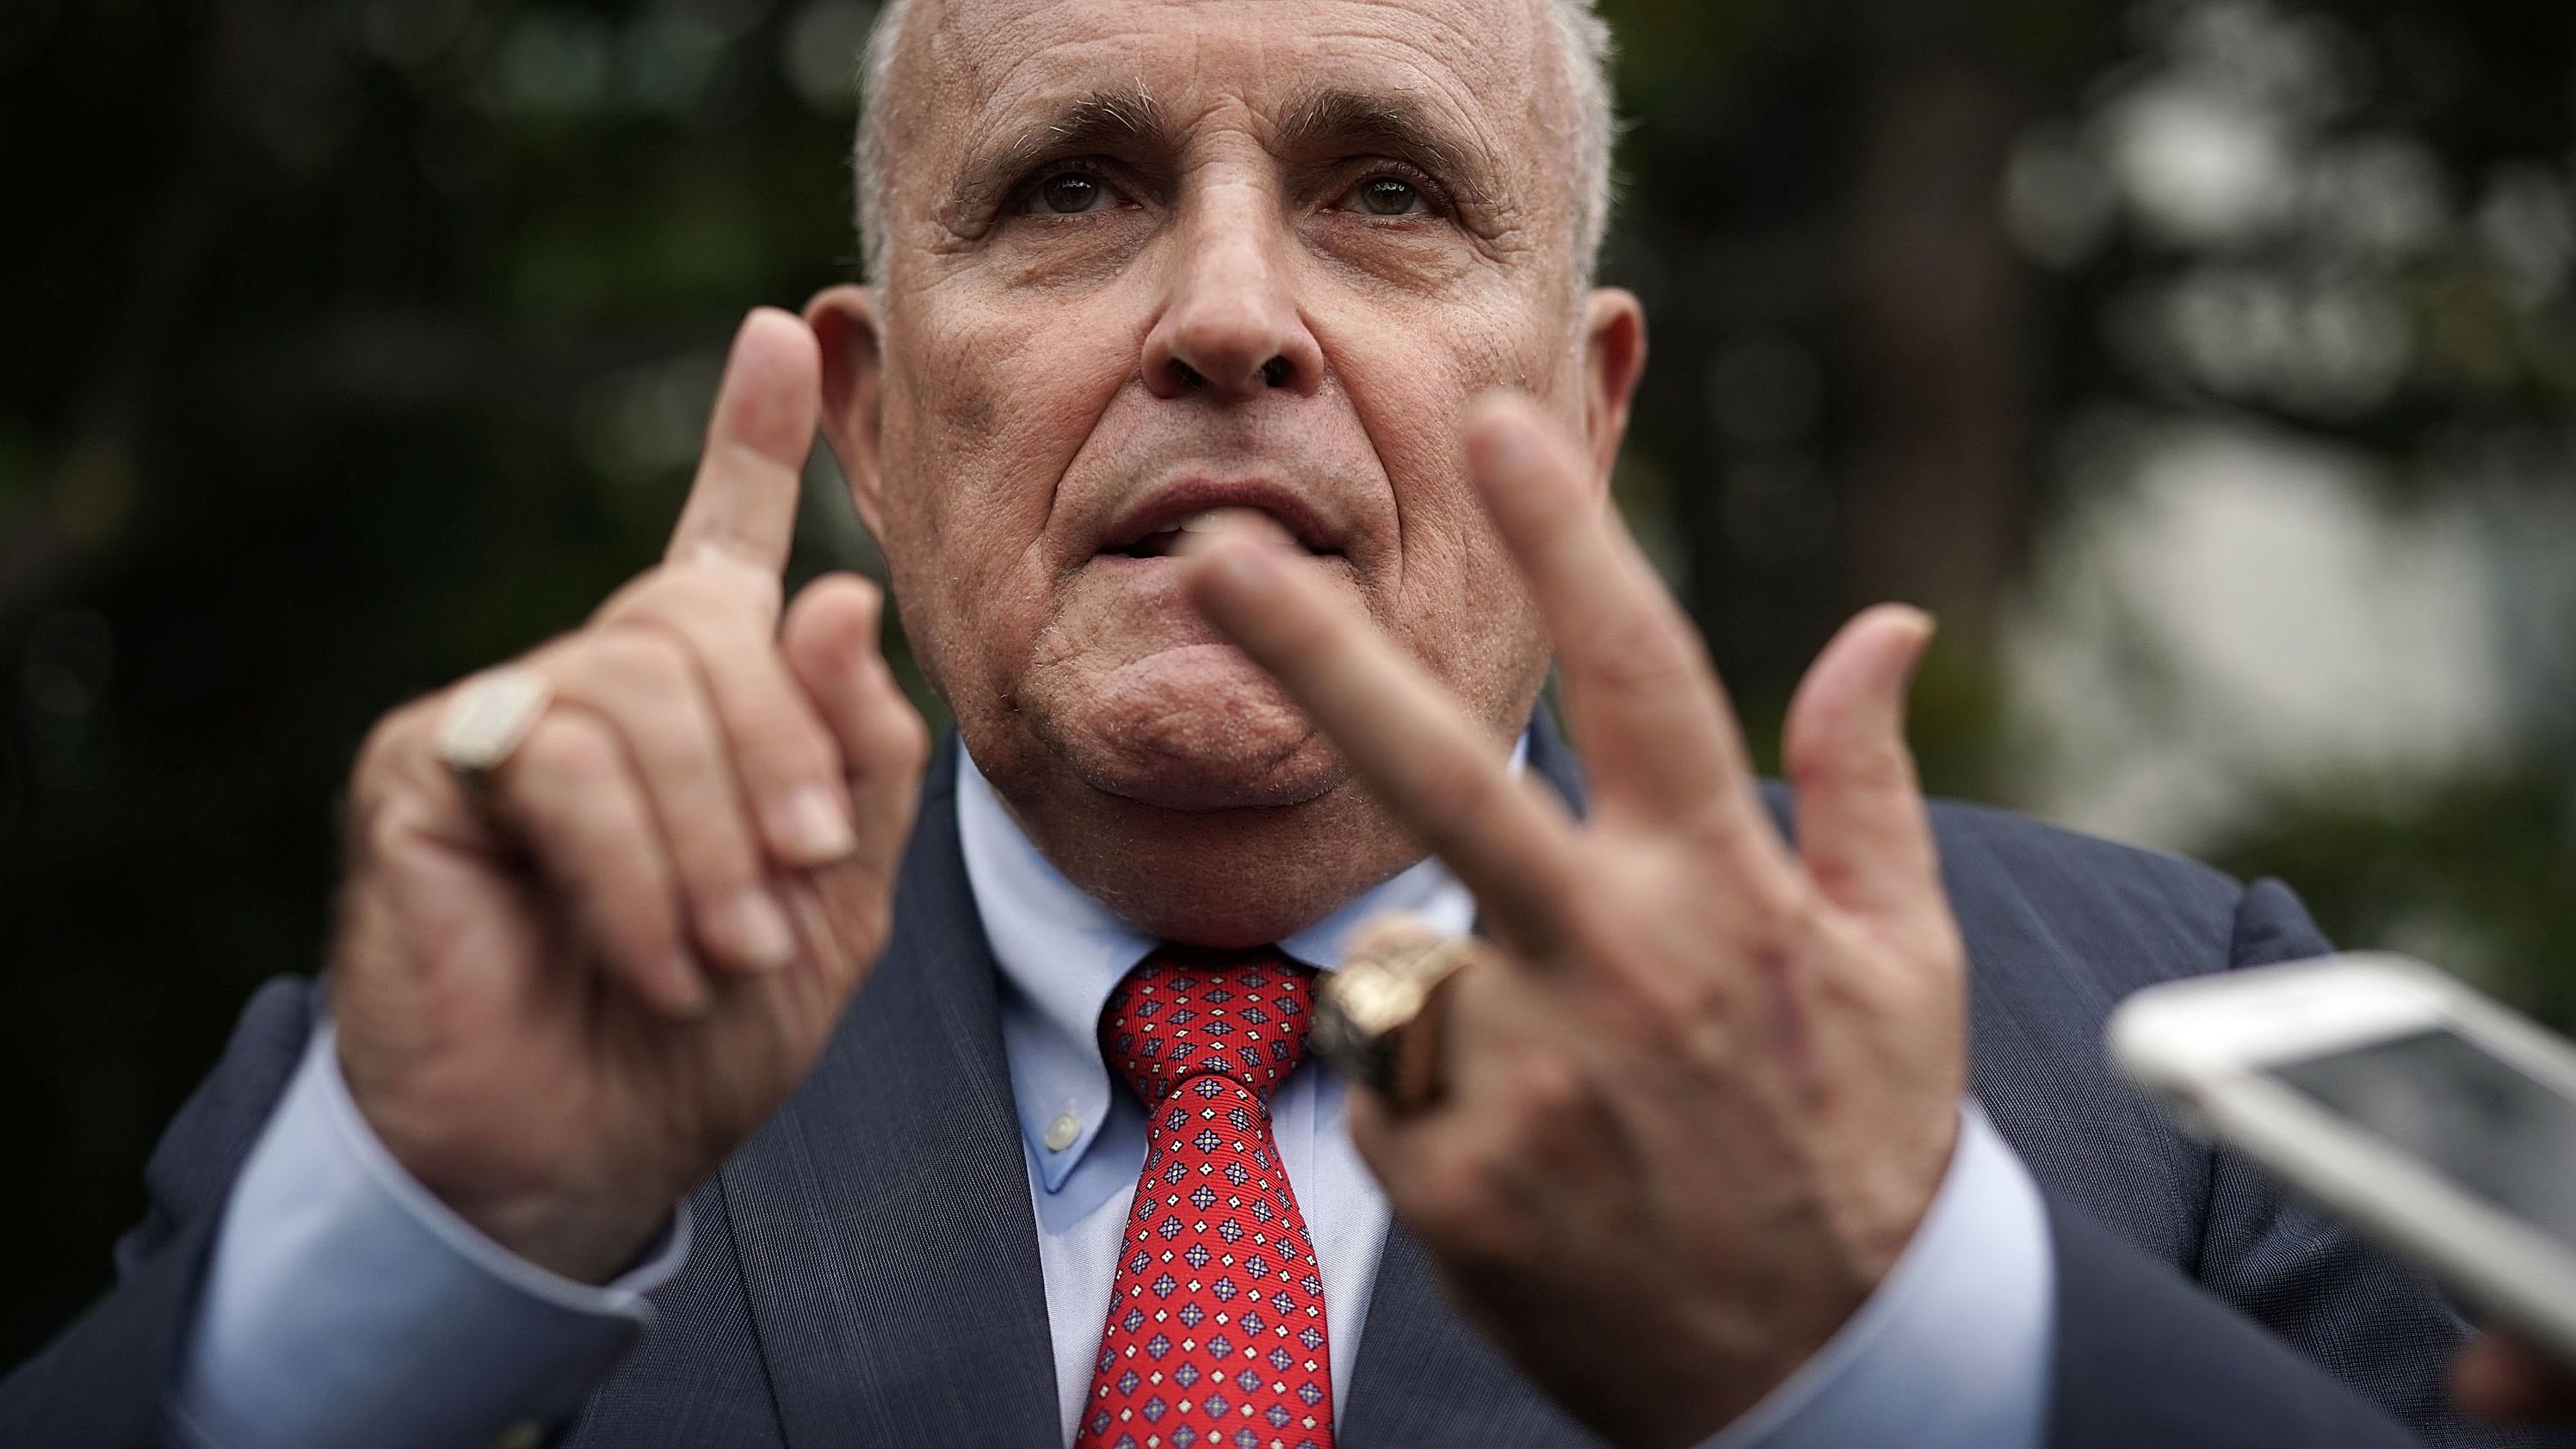 Rudy Giuliani, the former New York City mayor who became a personal lawyer for President Donald Trump, speaks to the media in May 2018.